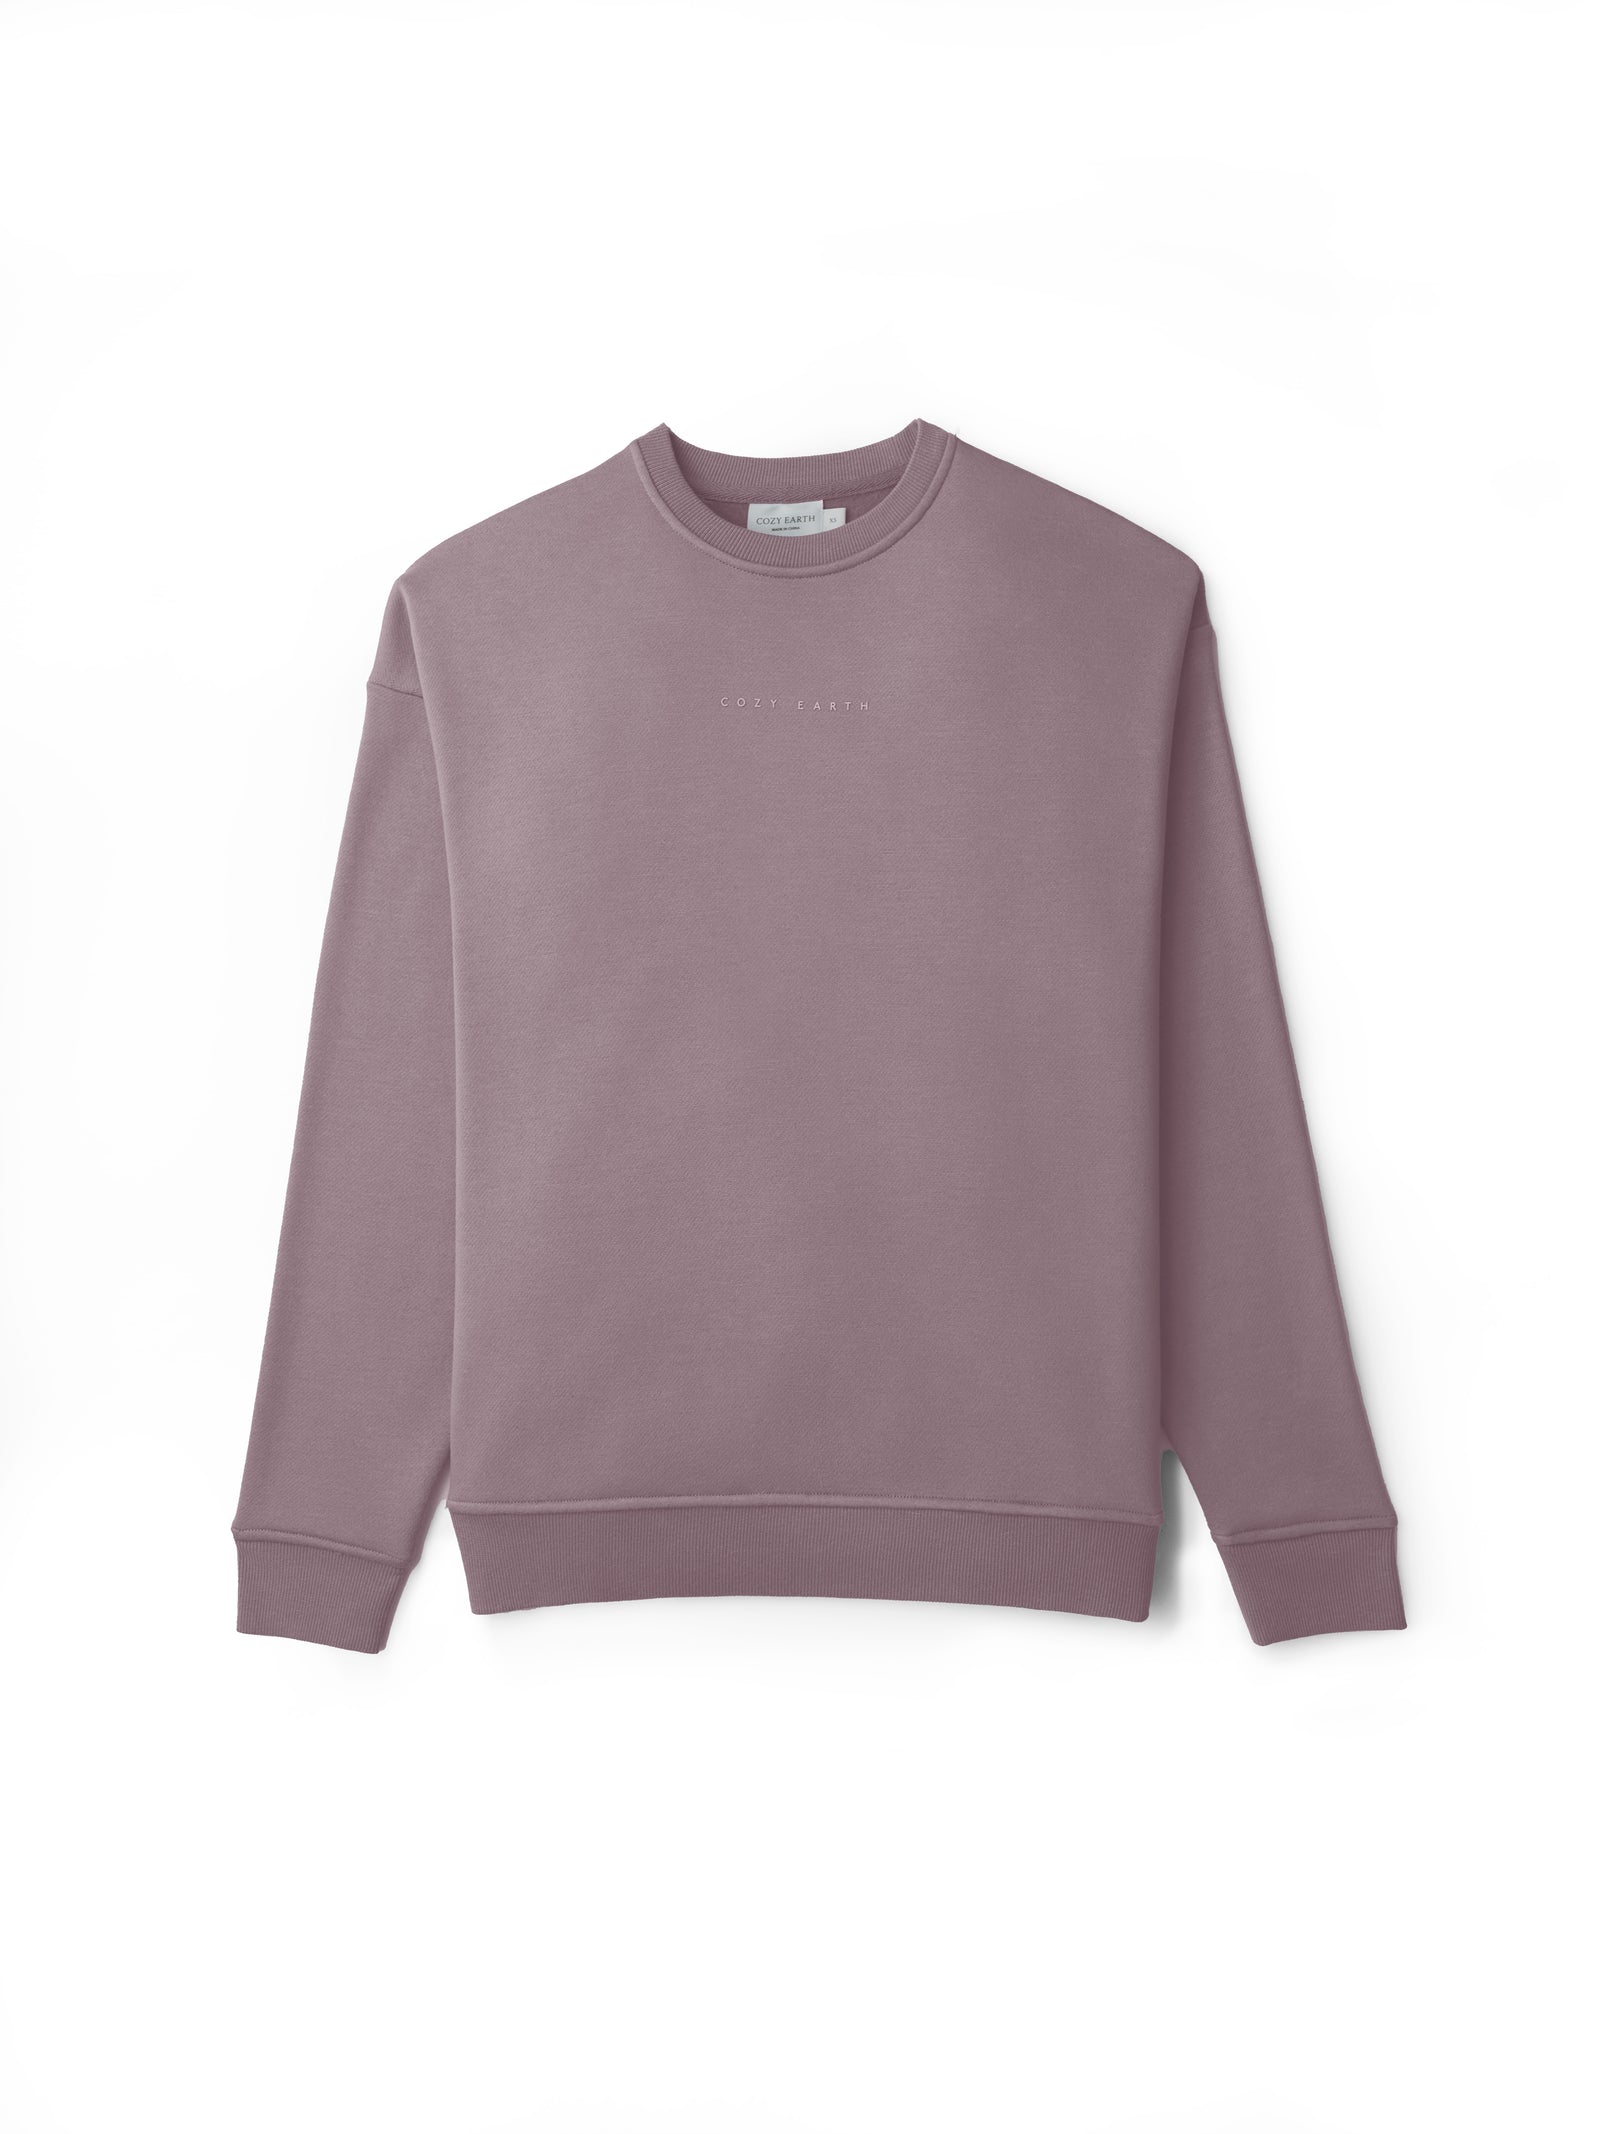 Flat lay of dusty orchid cityscape crewneck 